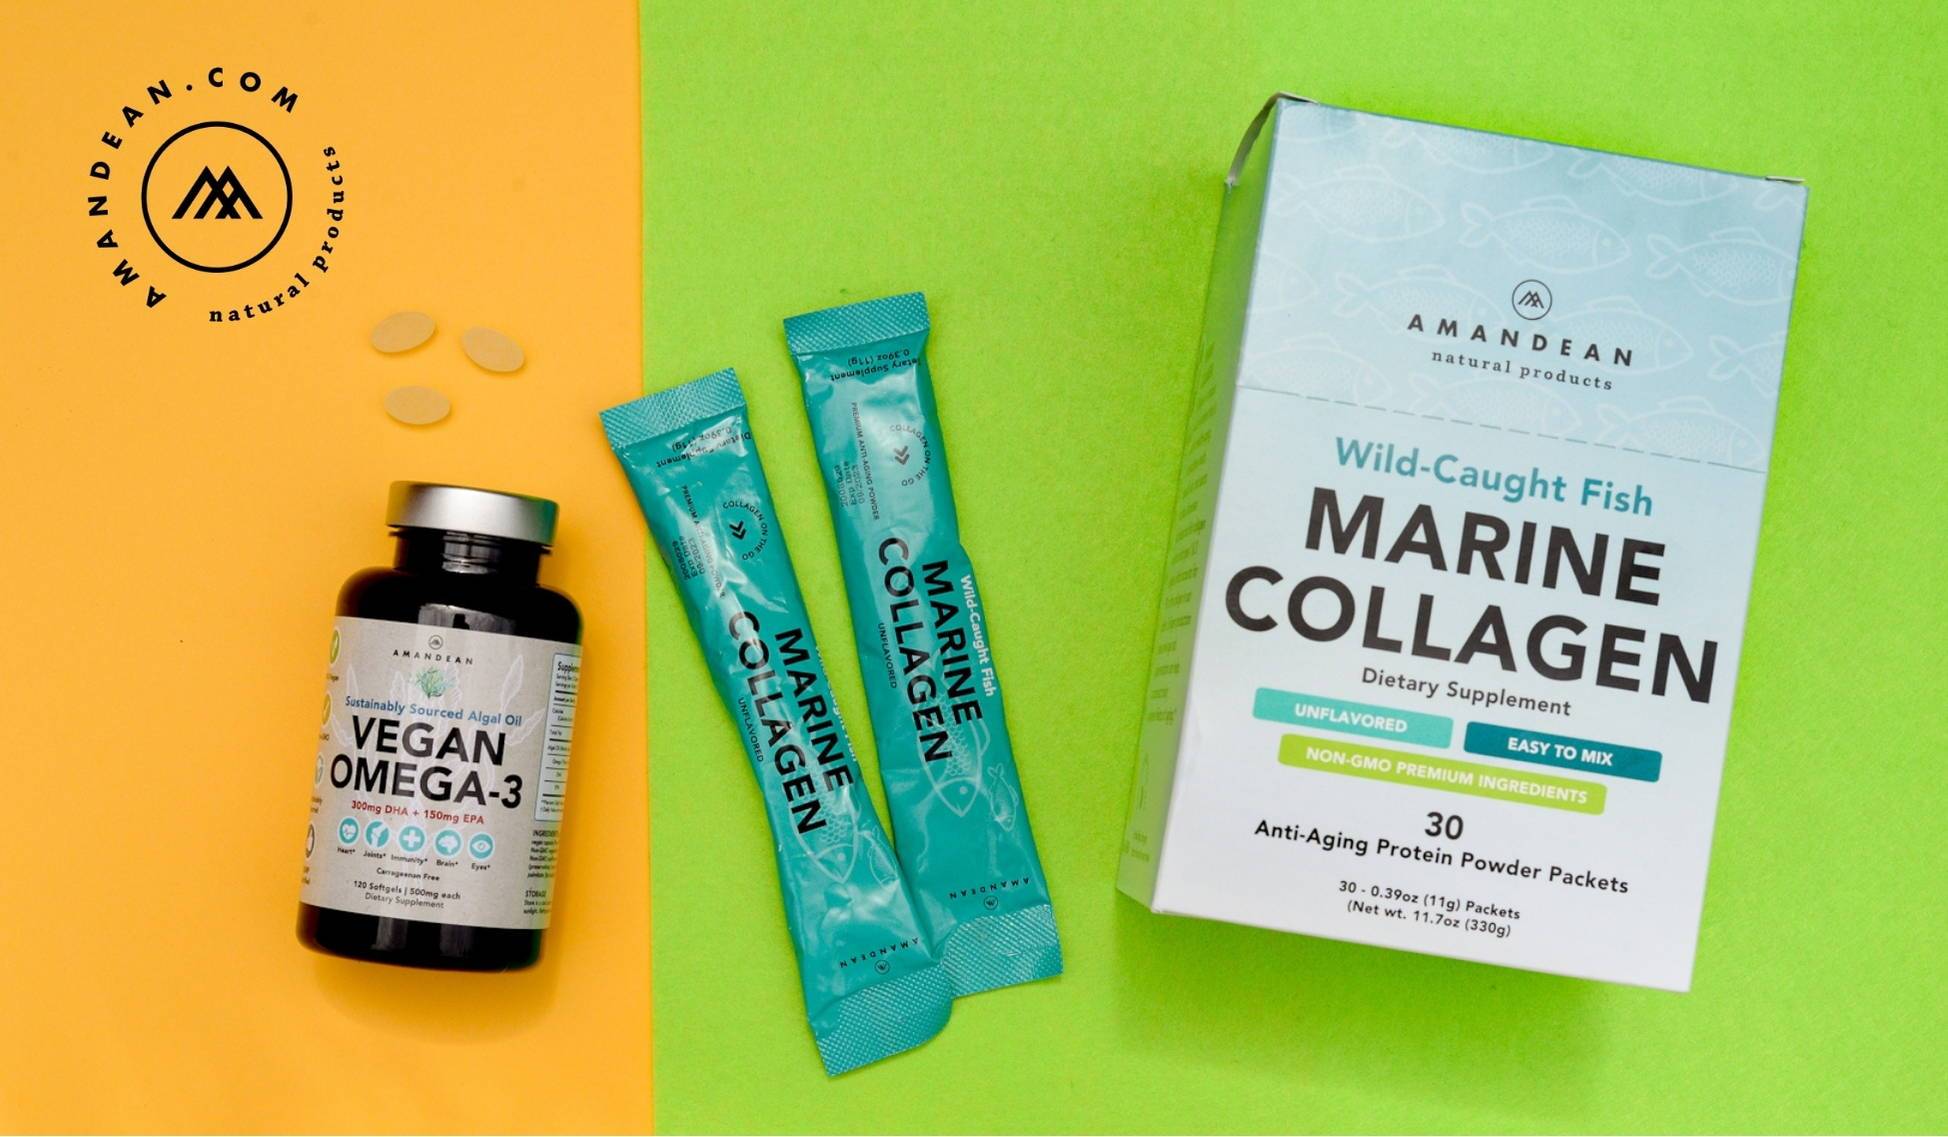 Ocean-Friendly Supplements for Those Who Care